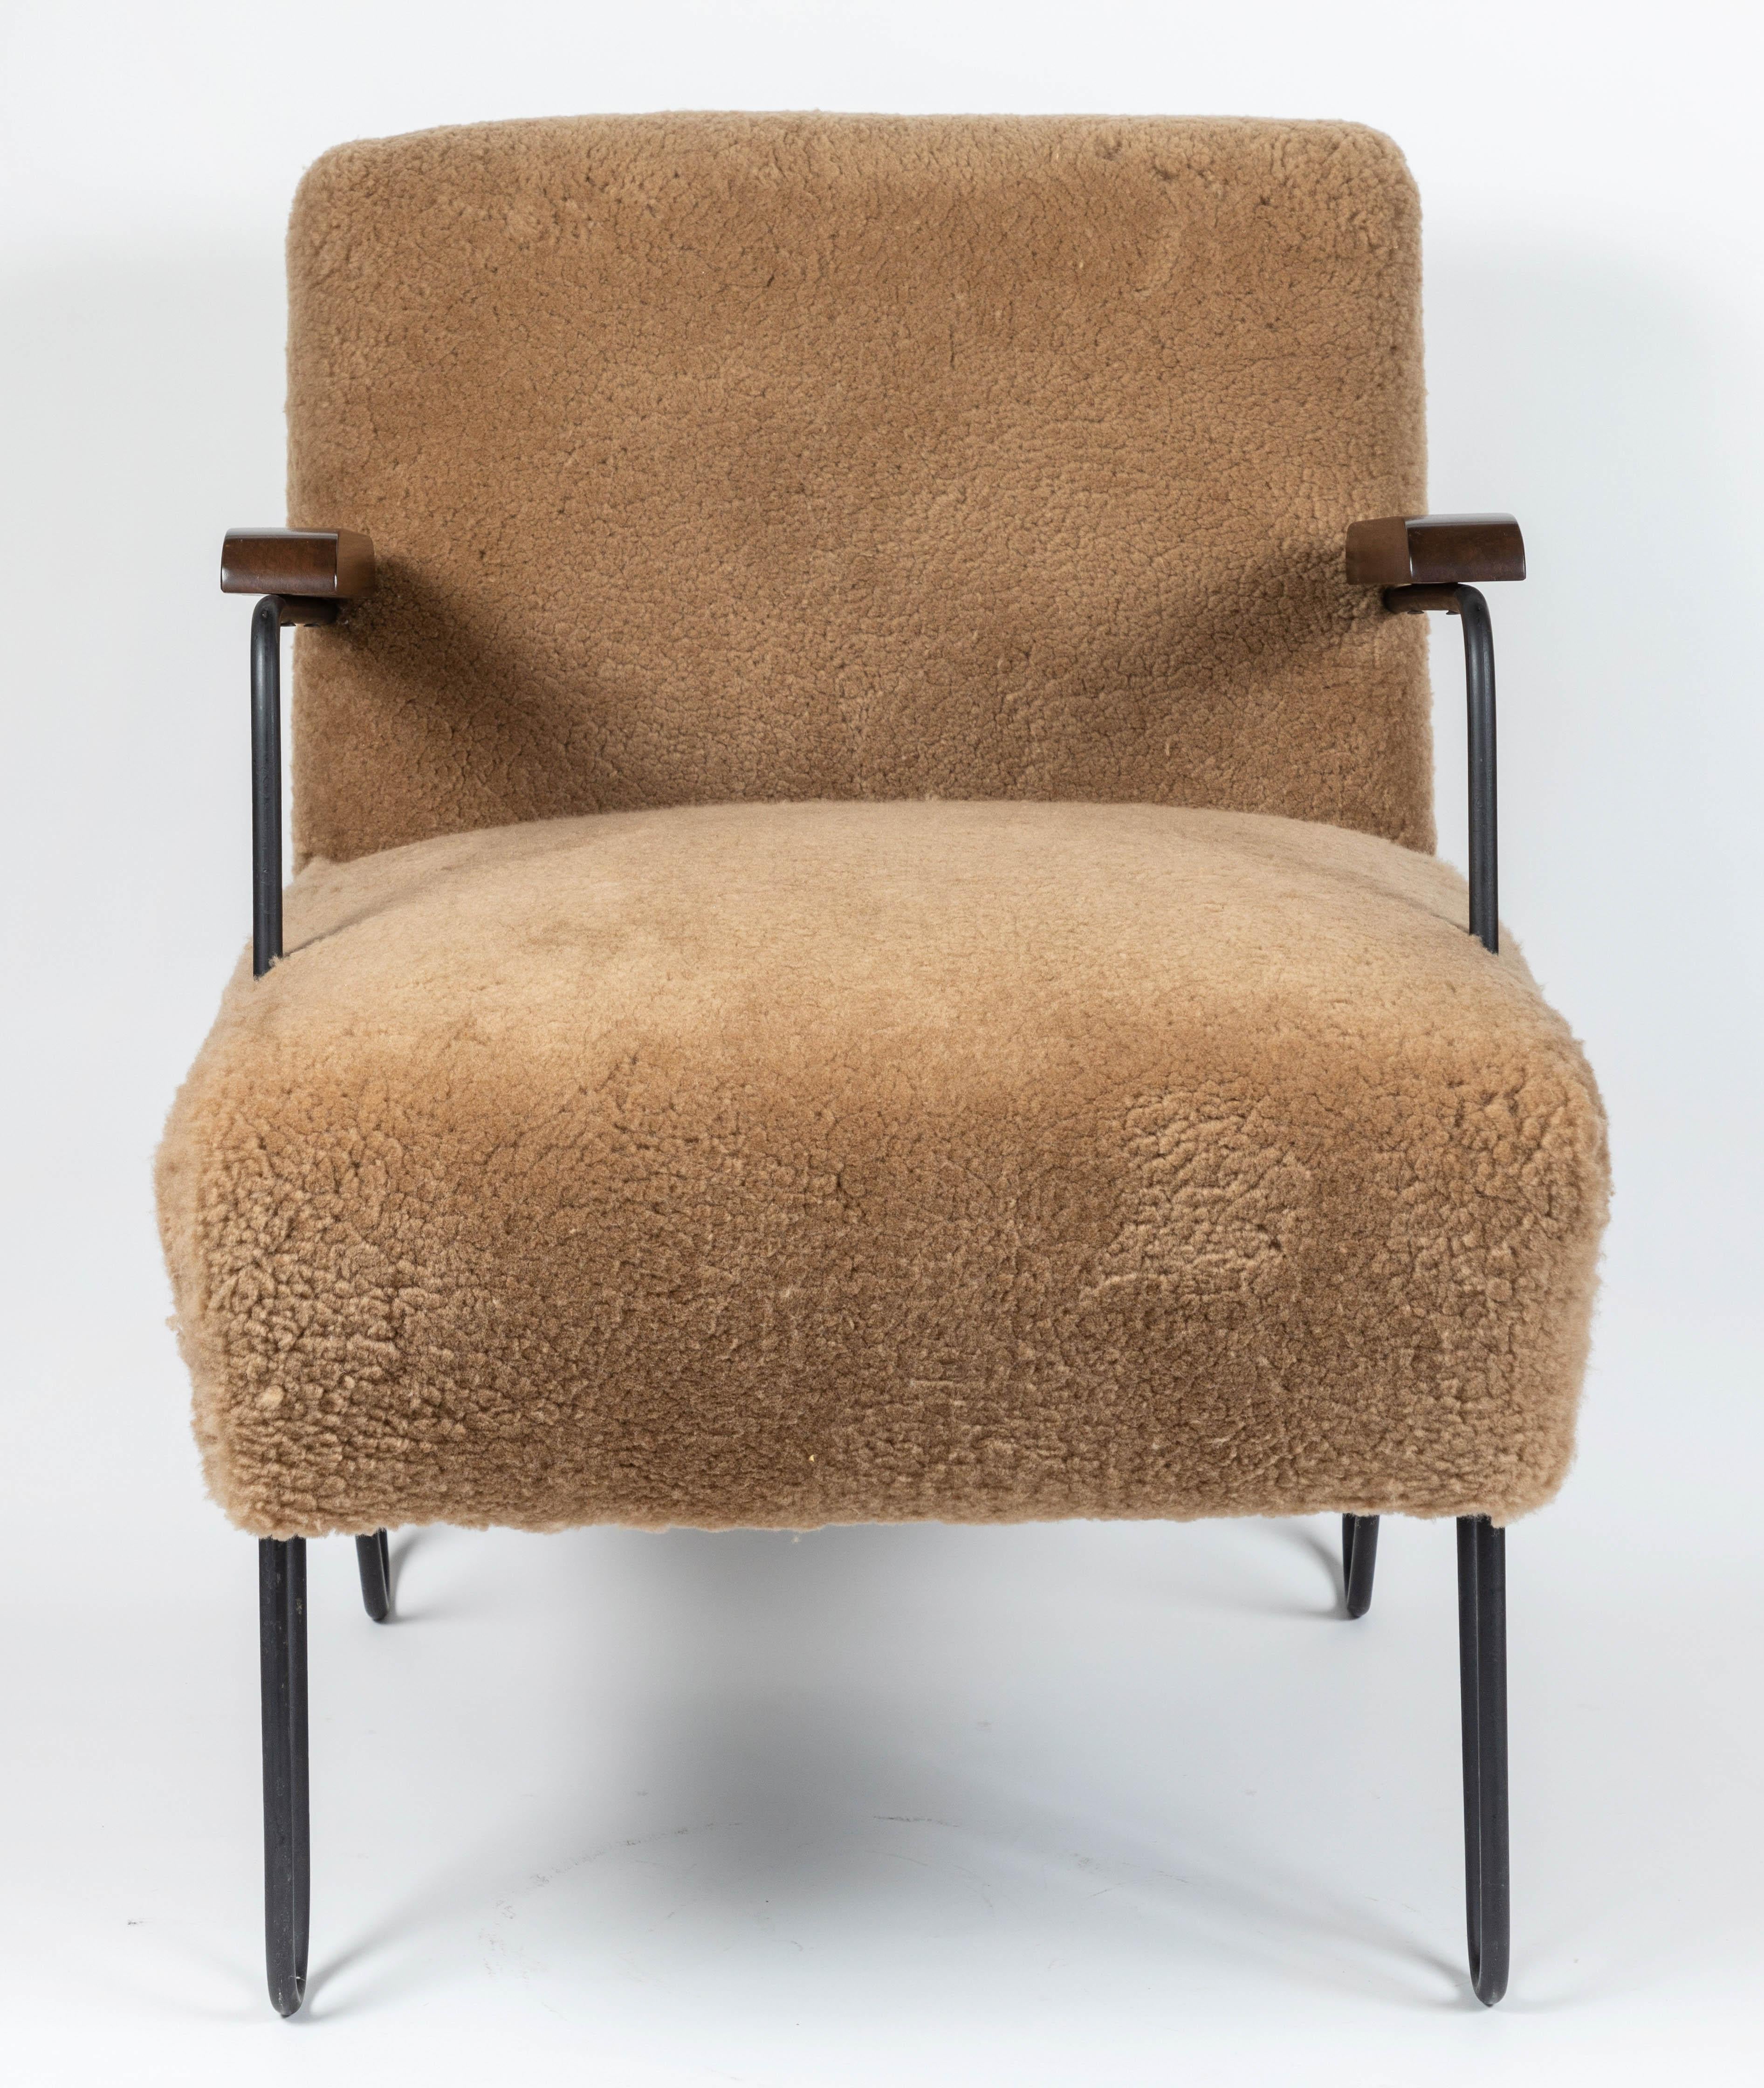 Custom made midcentury style hairpin chair with black iron frame, walnut armrests and upholstery as shown in caramel shearling.

Also available in white shearling, as shown in photos.

Lead time approximate 6 weeks.